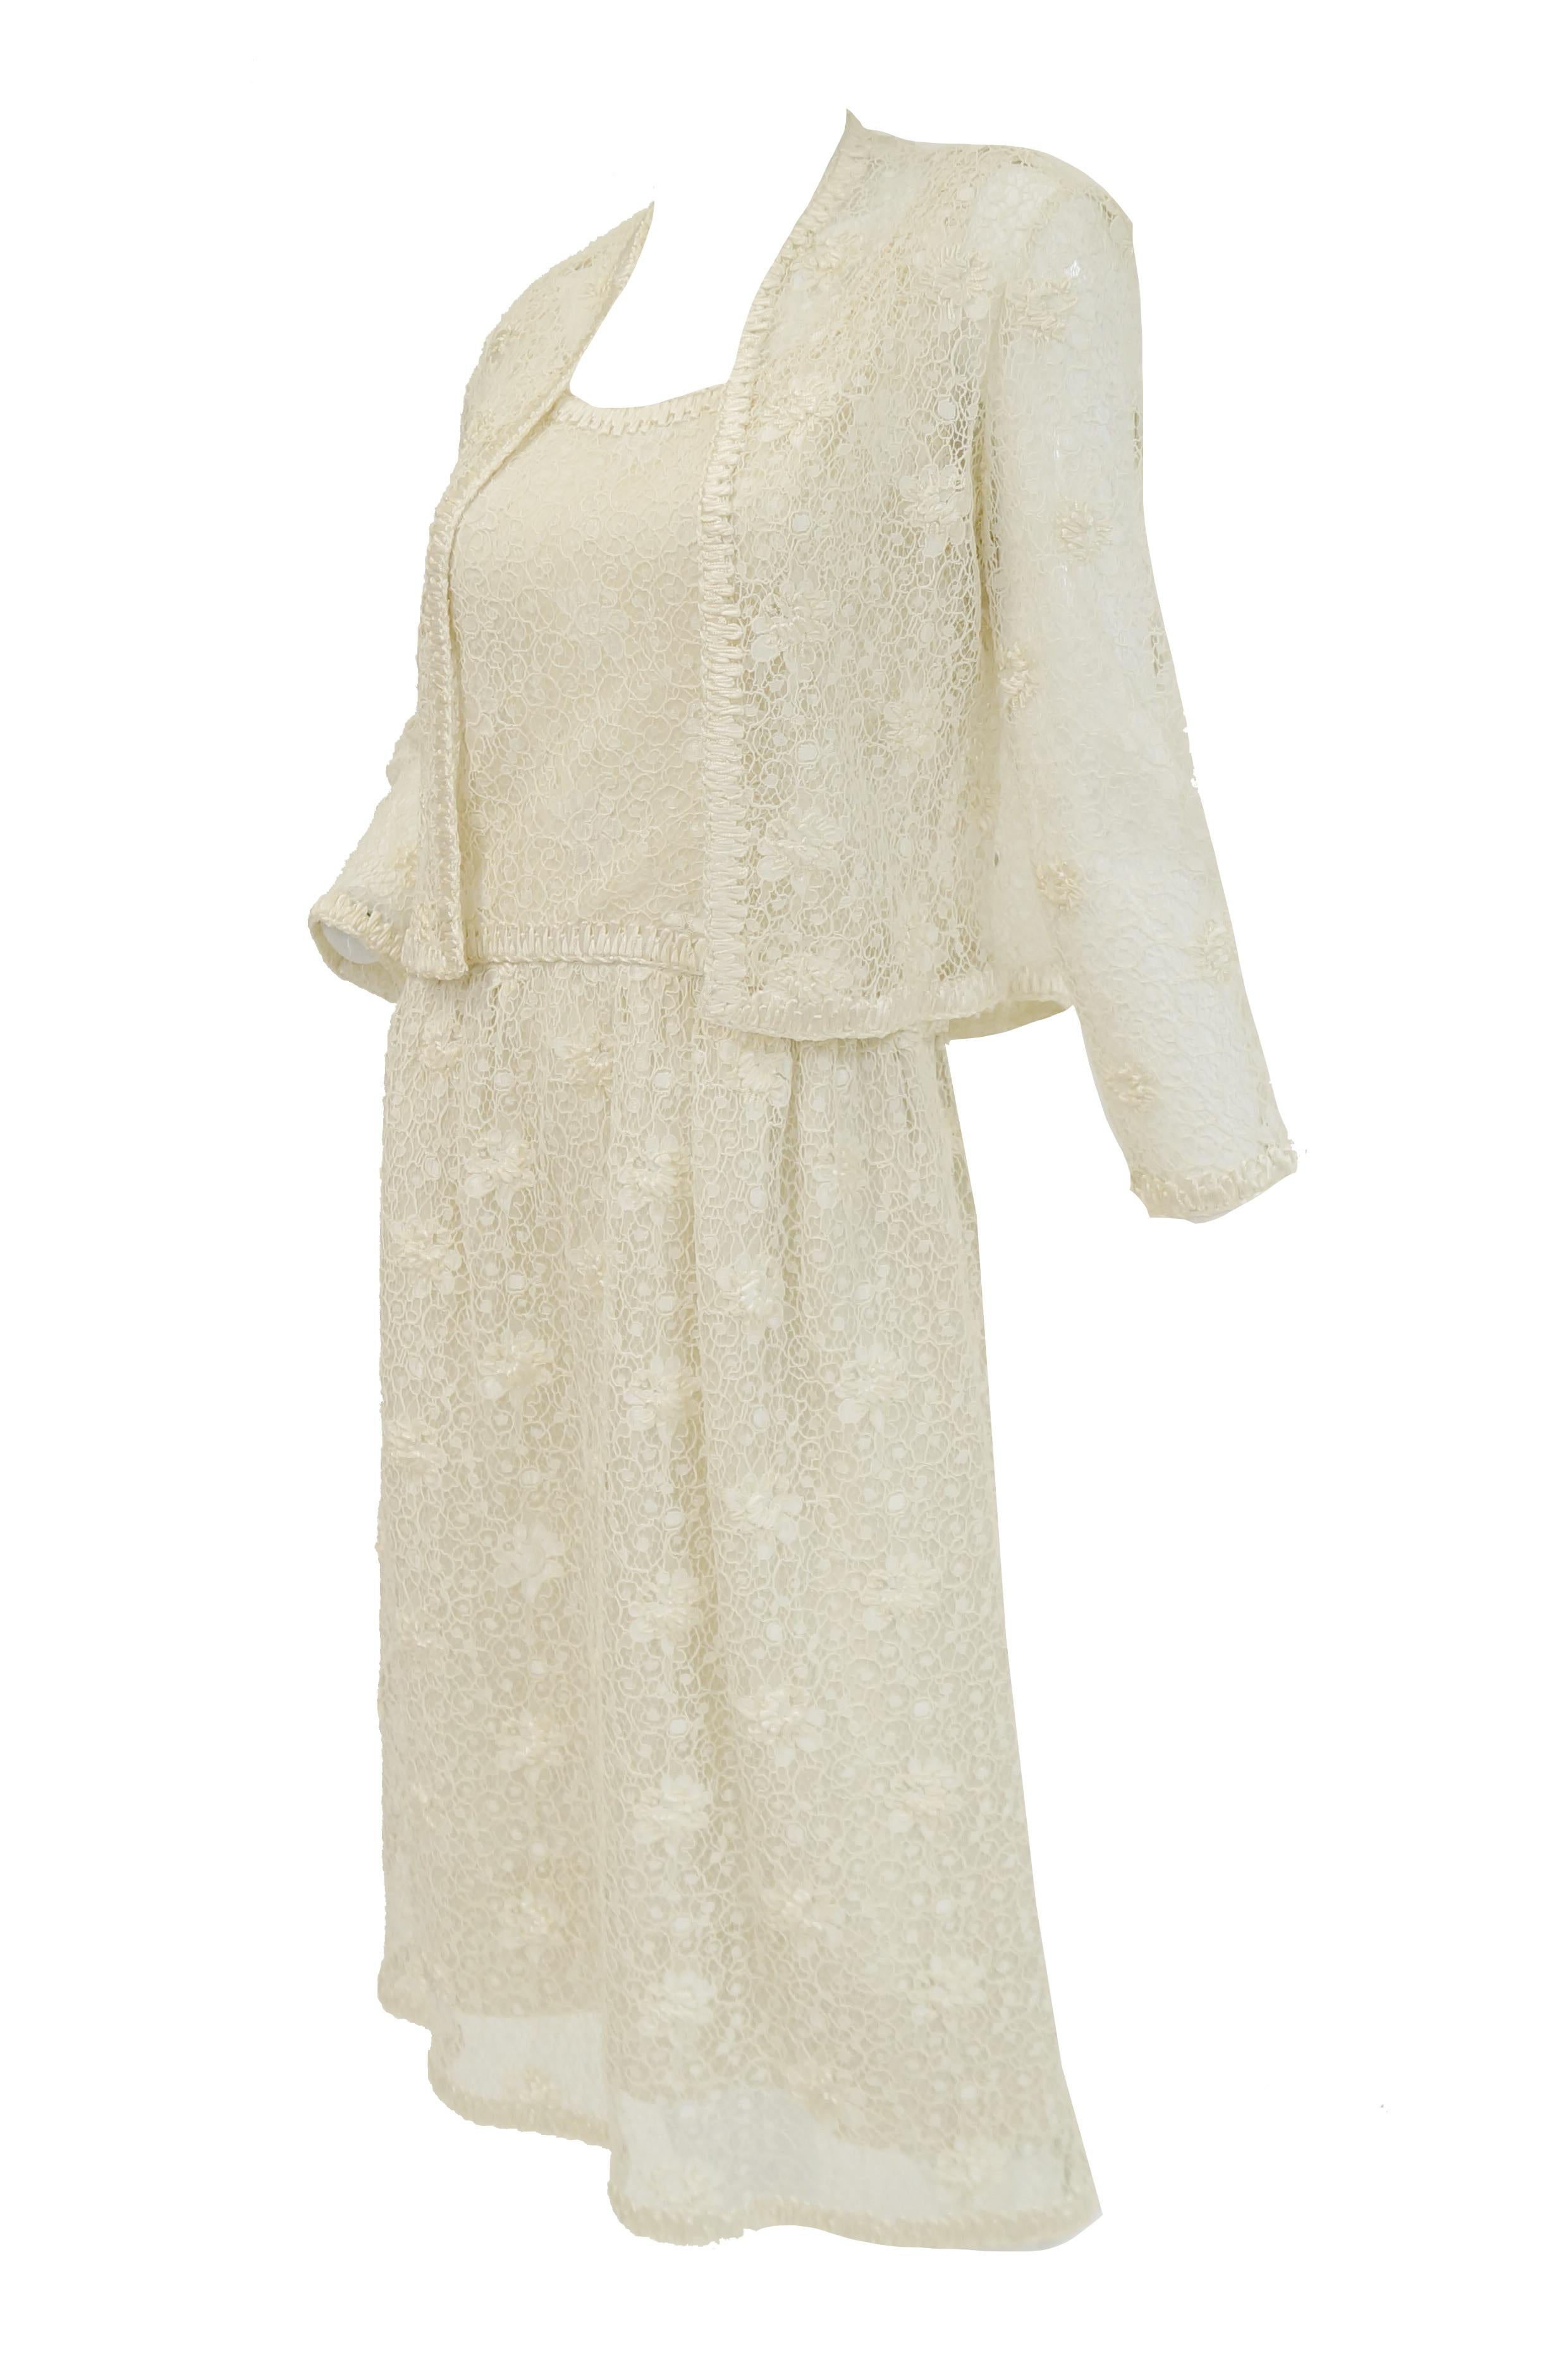 1960s Jean Louis Couture Ivory Lace and Ribbon Work Cocktail Dress and Jacket For Sale 9